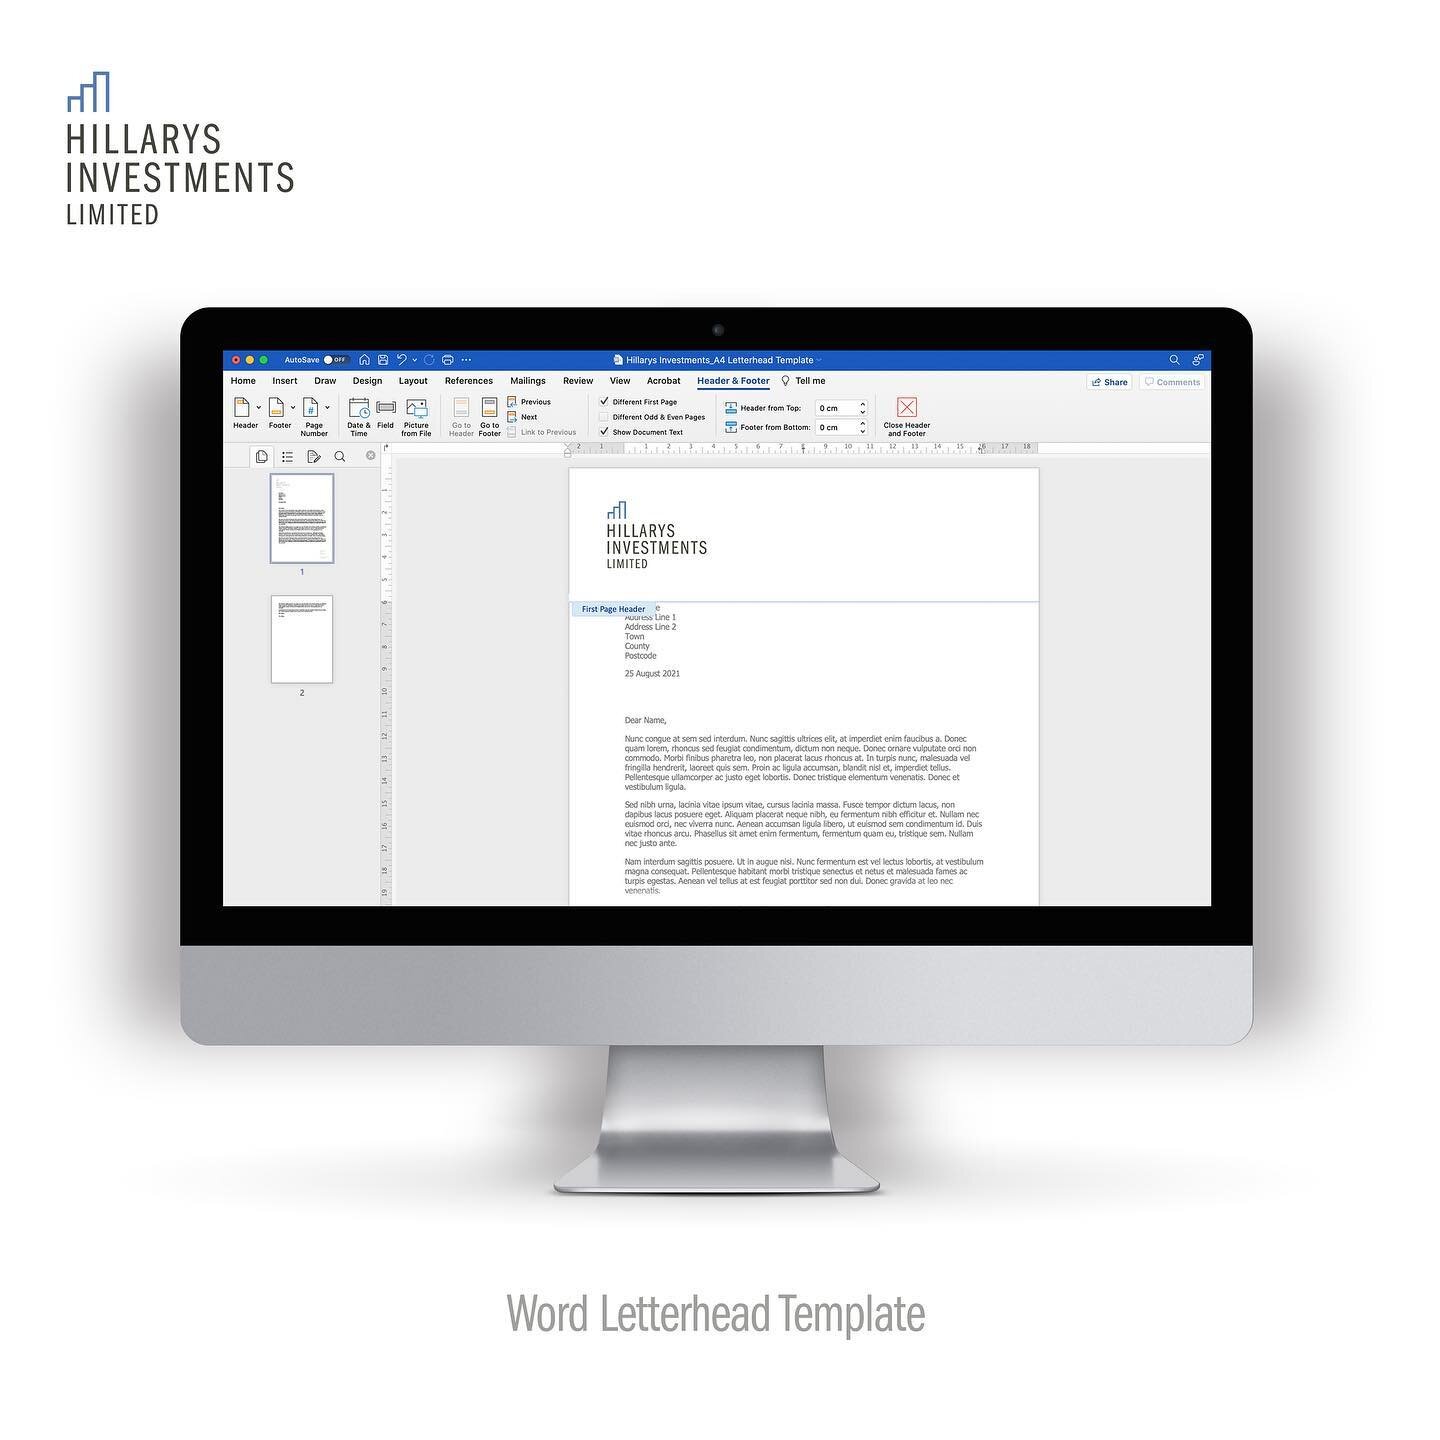 Keeping stationery layouts constant across the range with this Microsoft Word Letterhead Template. Designed and supplied to Tony Hillary for Hillarys Investments. 👩&zwj;💻
.
.
.
.
.
#letterhead #microsoftword #microsoftwordtemplate #stationerydesign